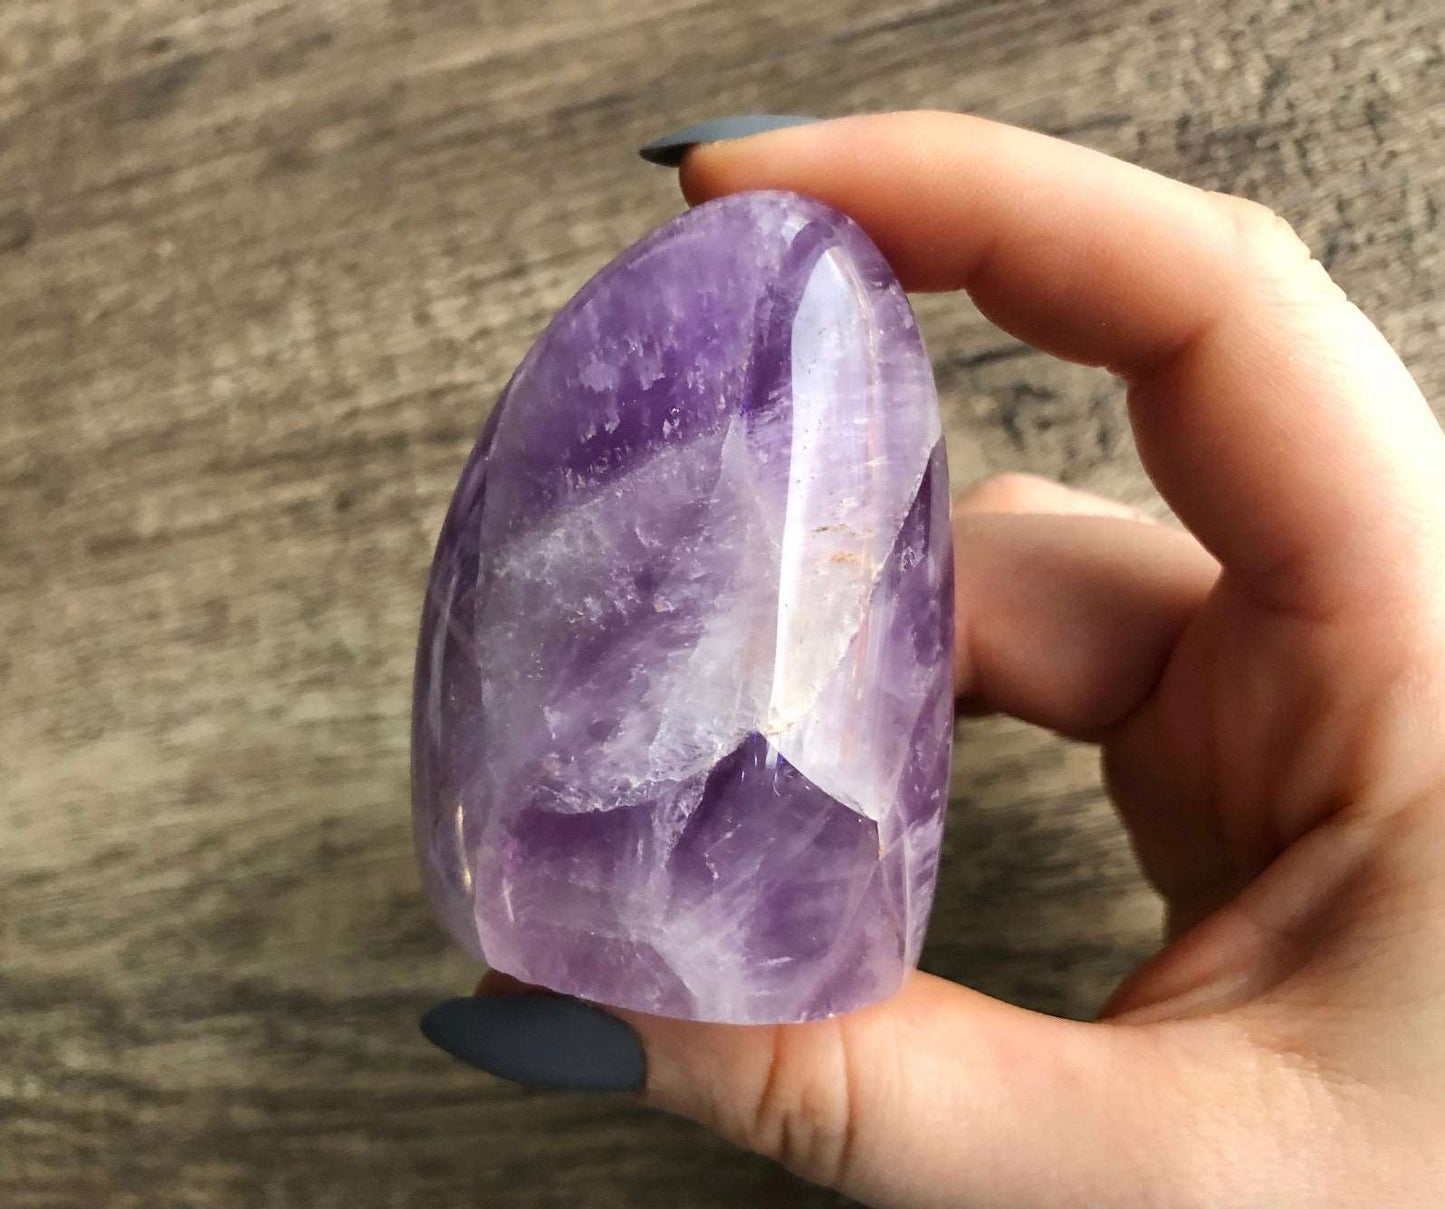 A small freestanding polished piece of amethyst is shown in the image. The crystal is a deep purple color and has a smooth, shiny surface.